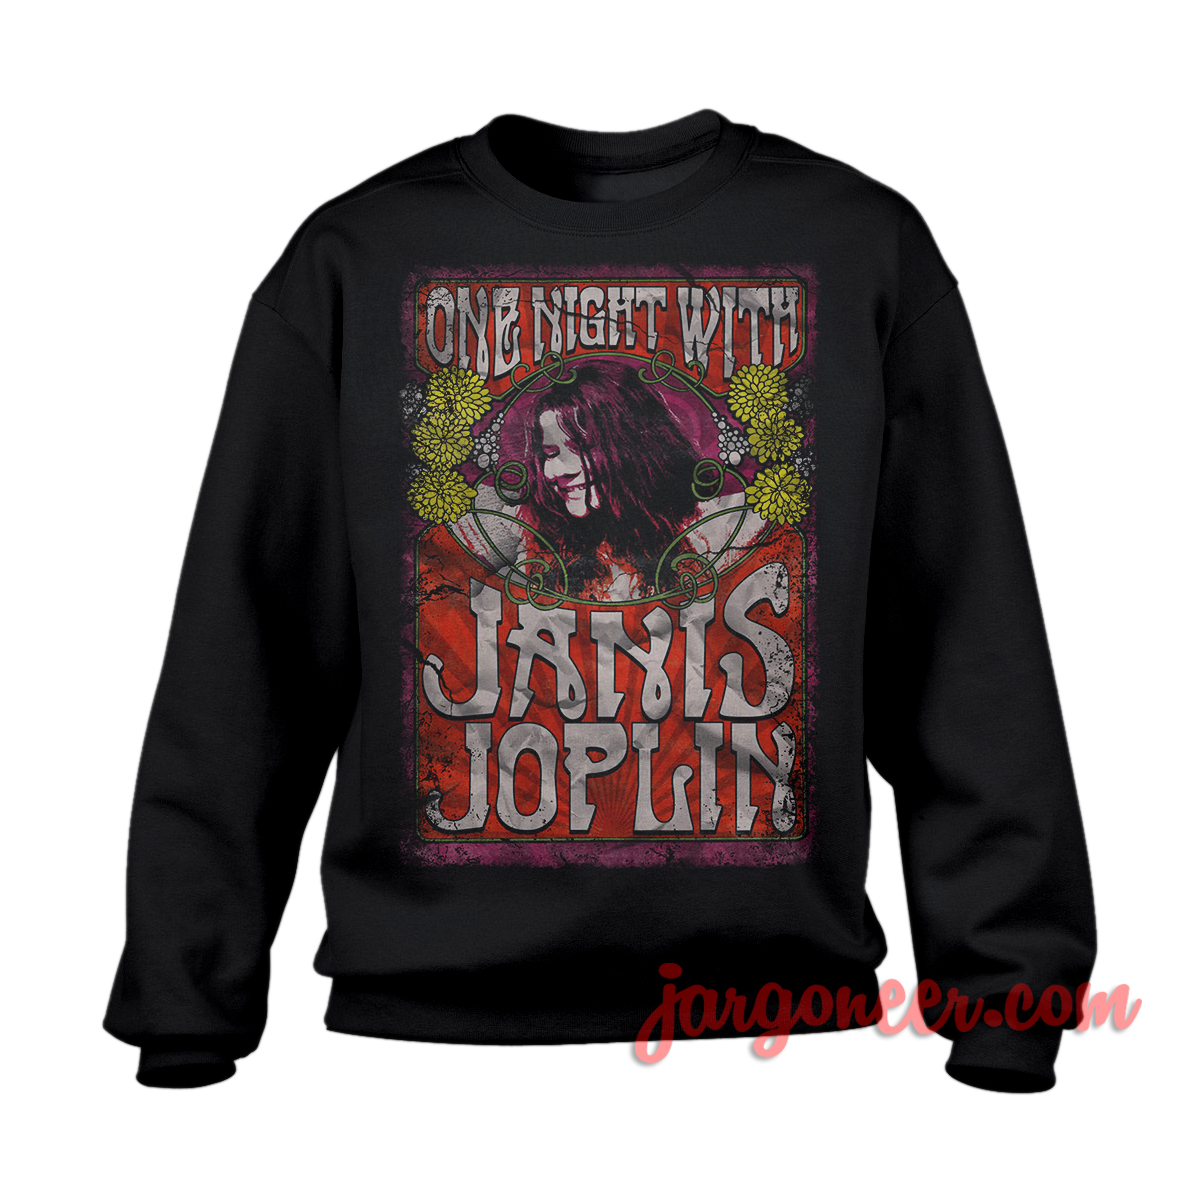 Janis Joplin One Night With Black SS - Shop Unique Graphic Cool Shirt Designs